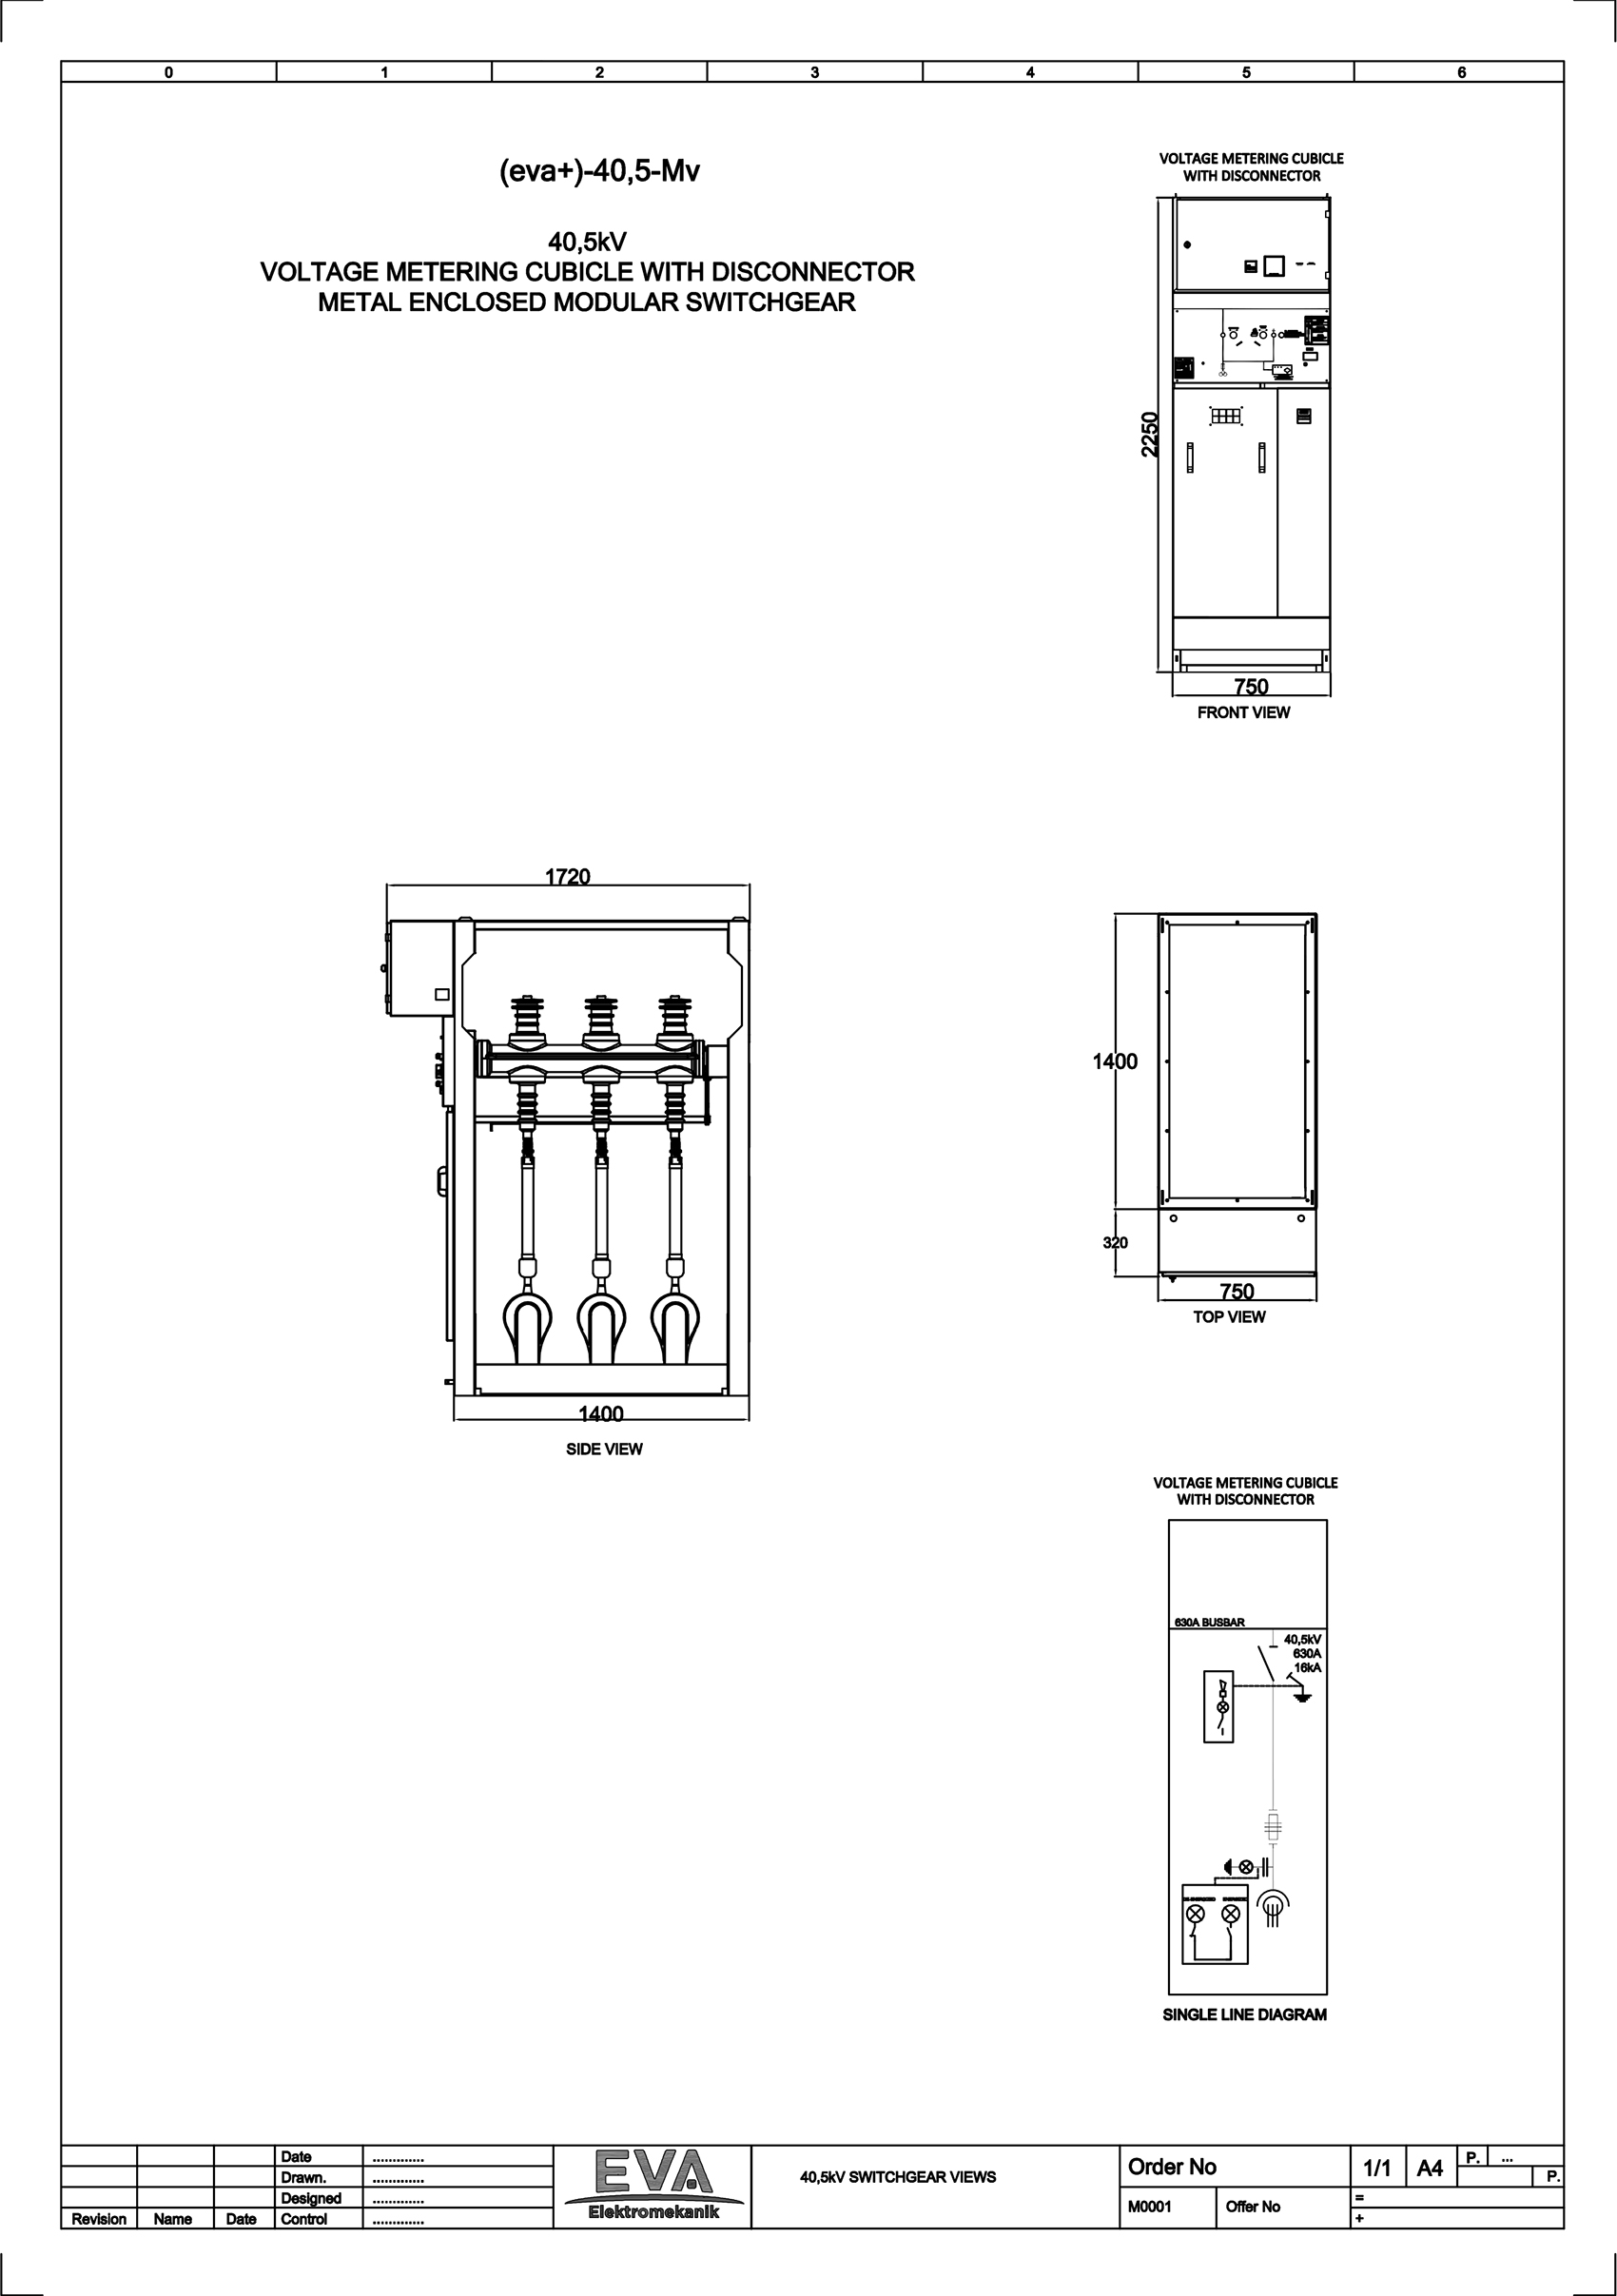 Voltage Metering Cubicle with Disconnector	